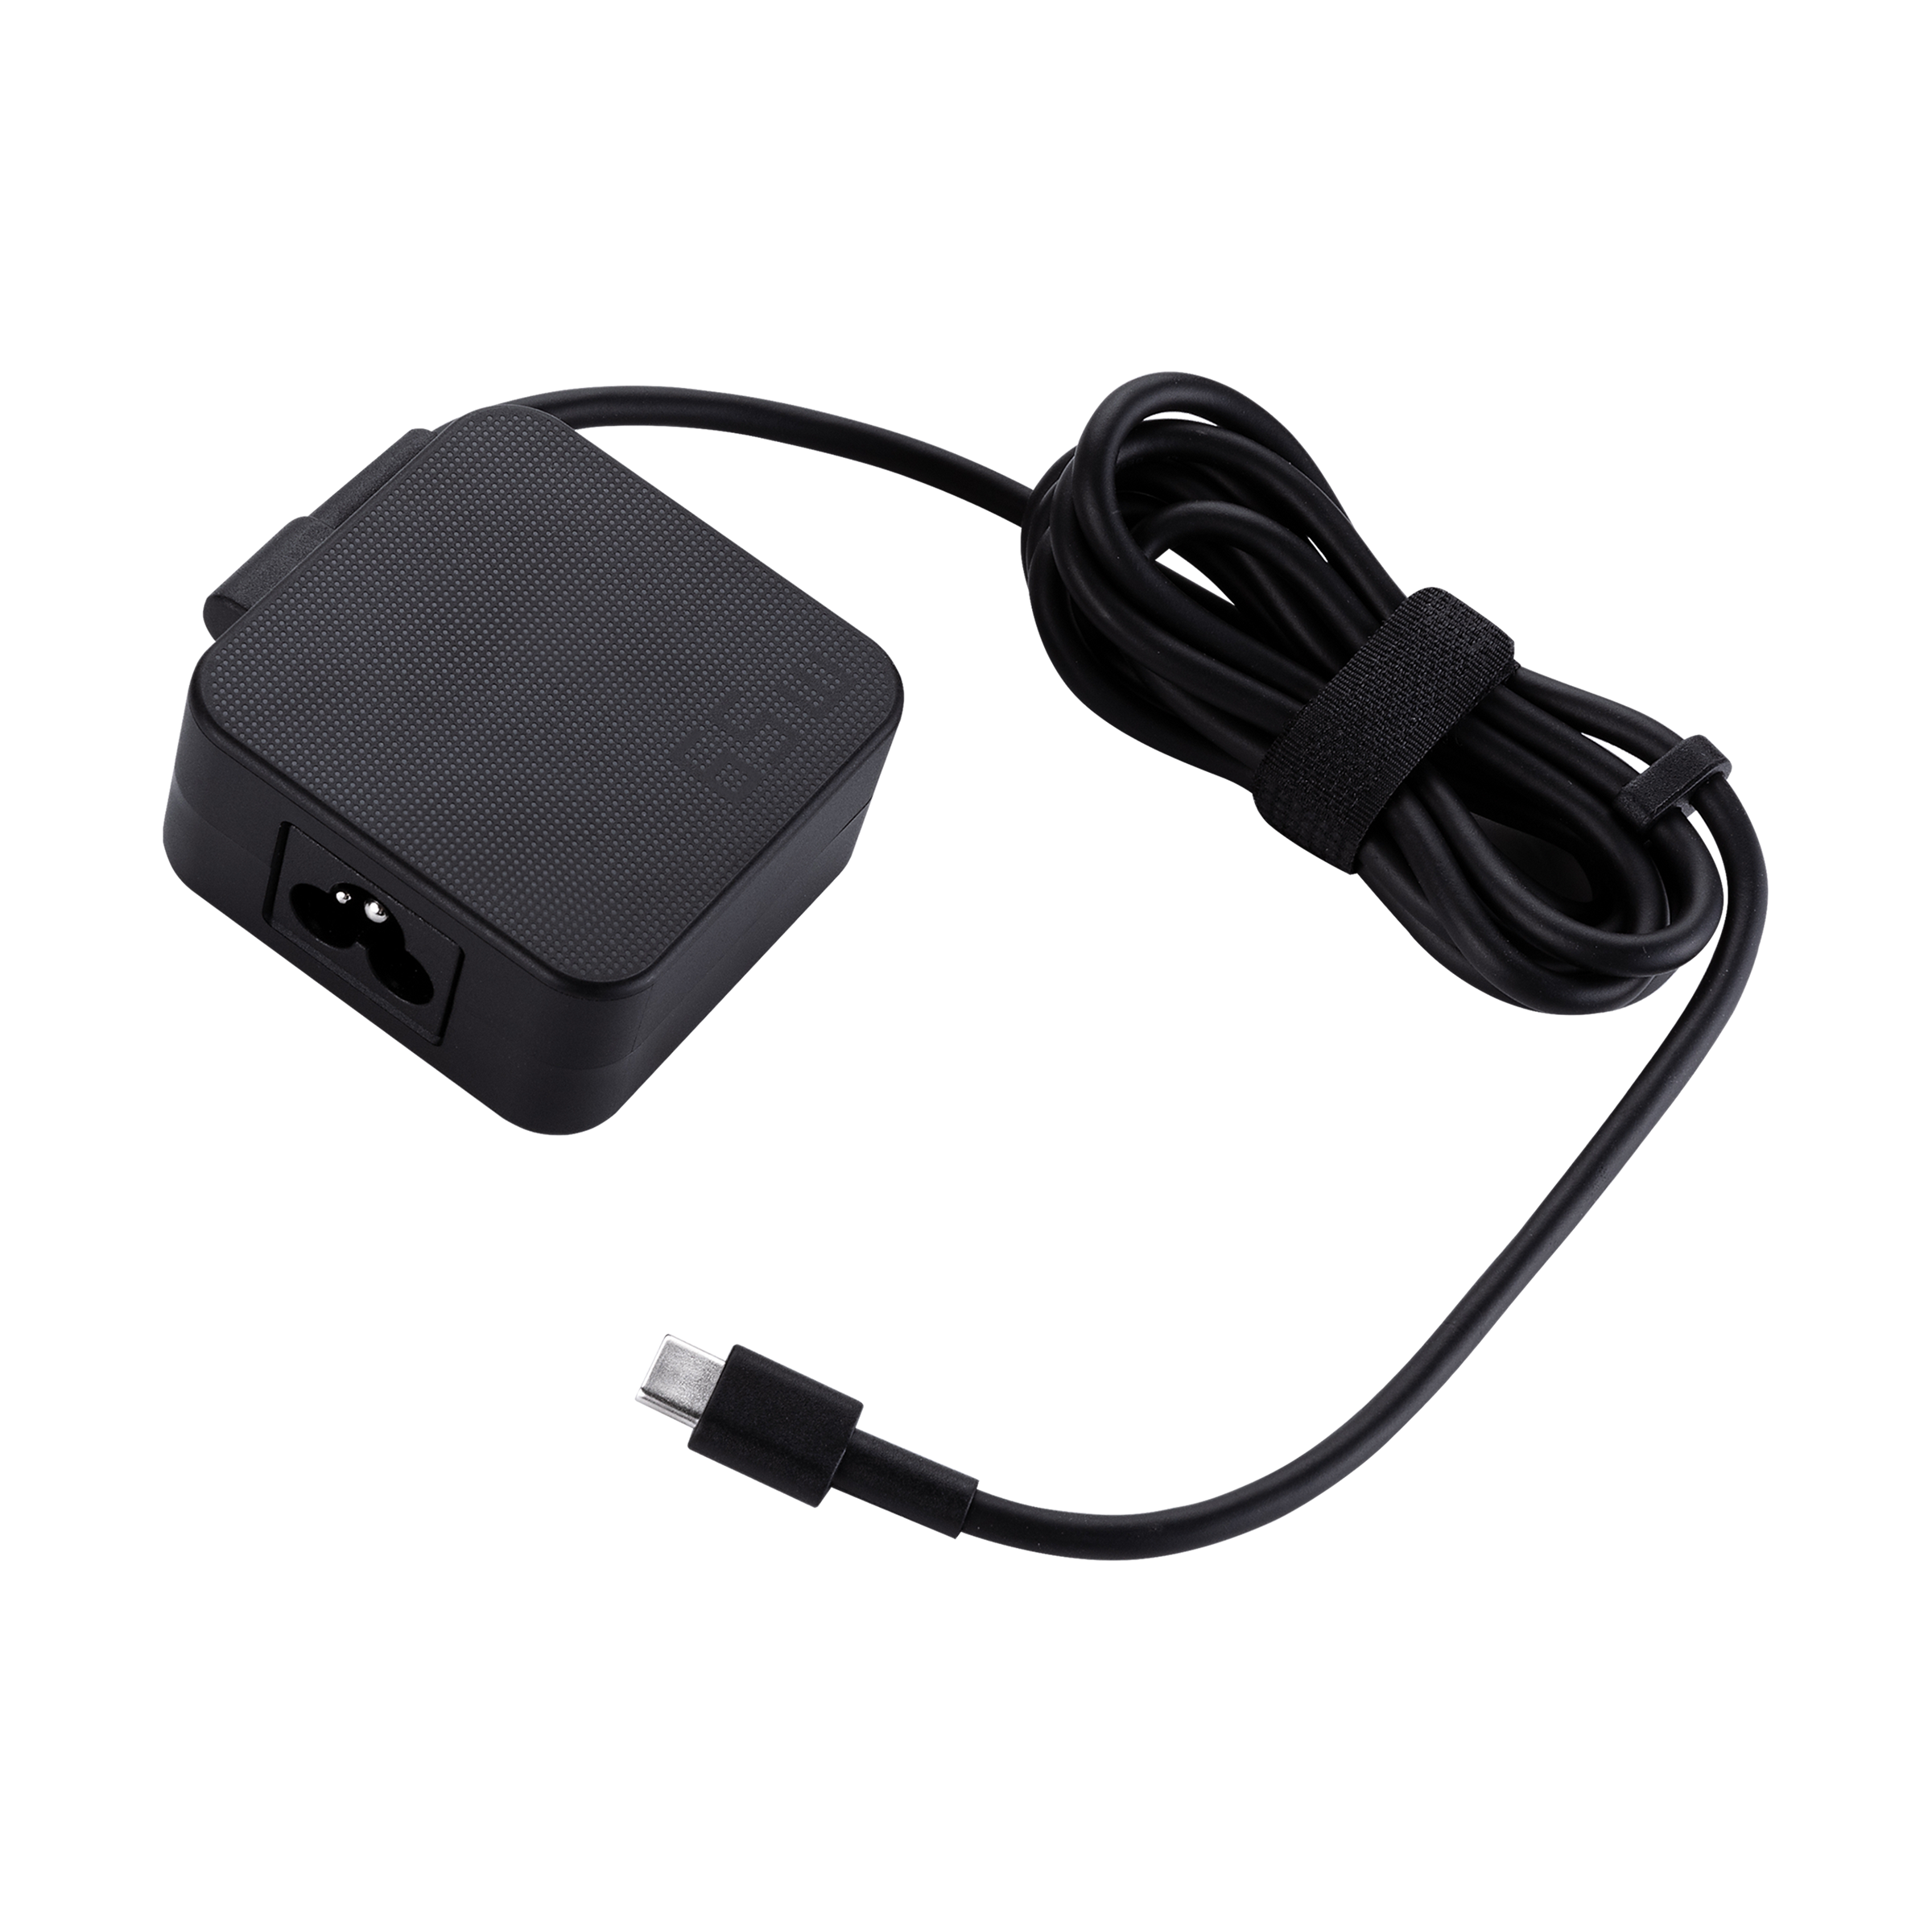 ASUS 65W USB-C Adapter｜Adapters and Chargers｜ASUS Global